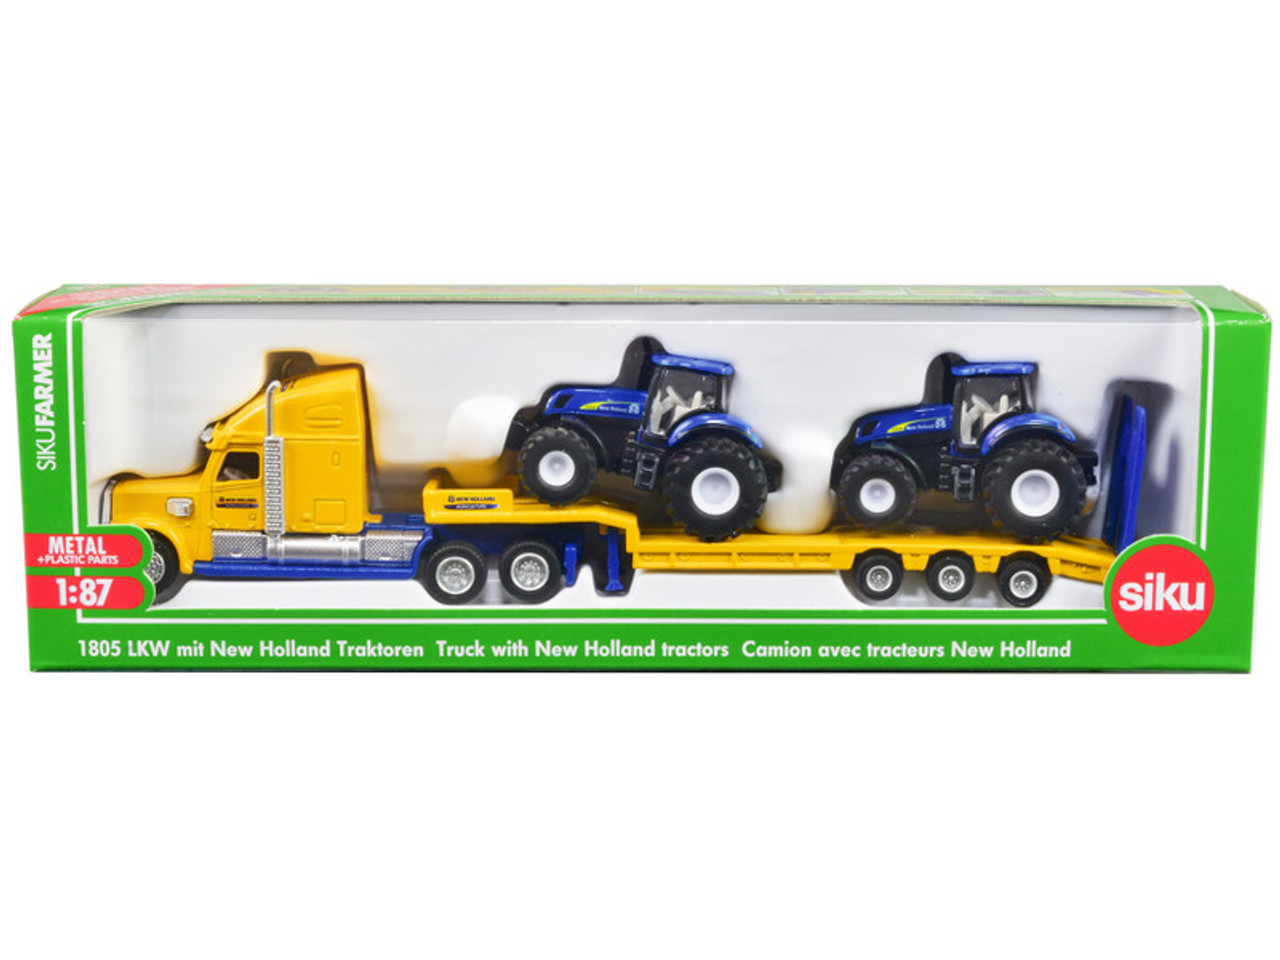 Tractor Truck Yellow with 2 New Holland T7070 Tractors Blue 1/87 (HO) Diecast Models by Siku